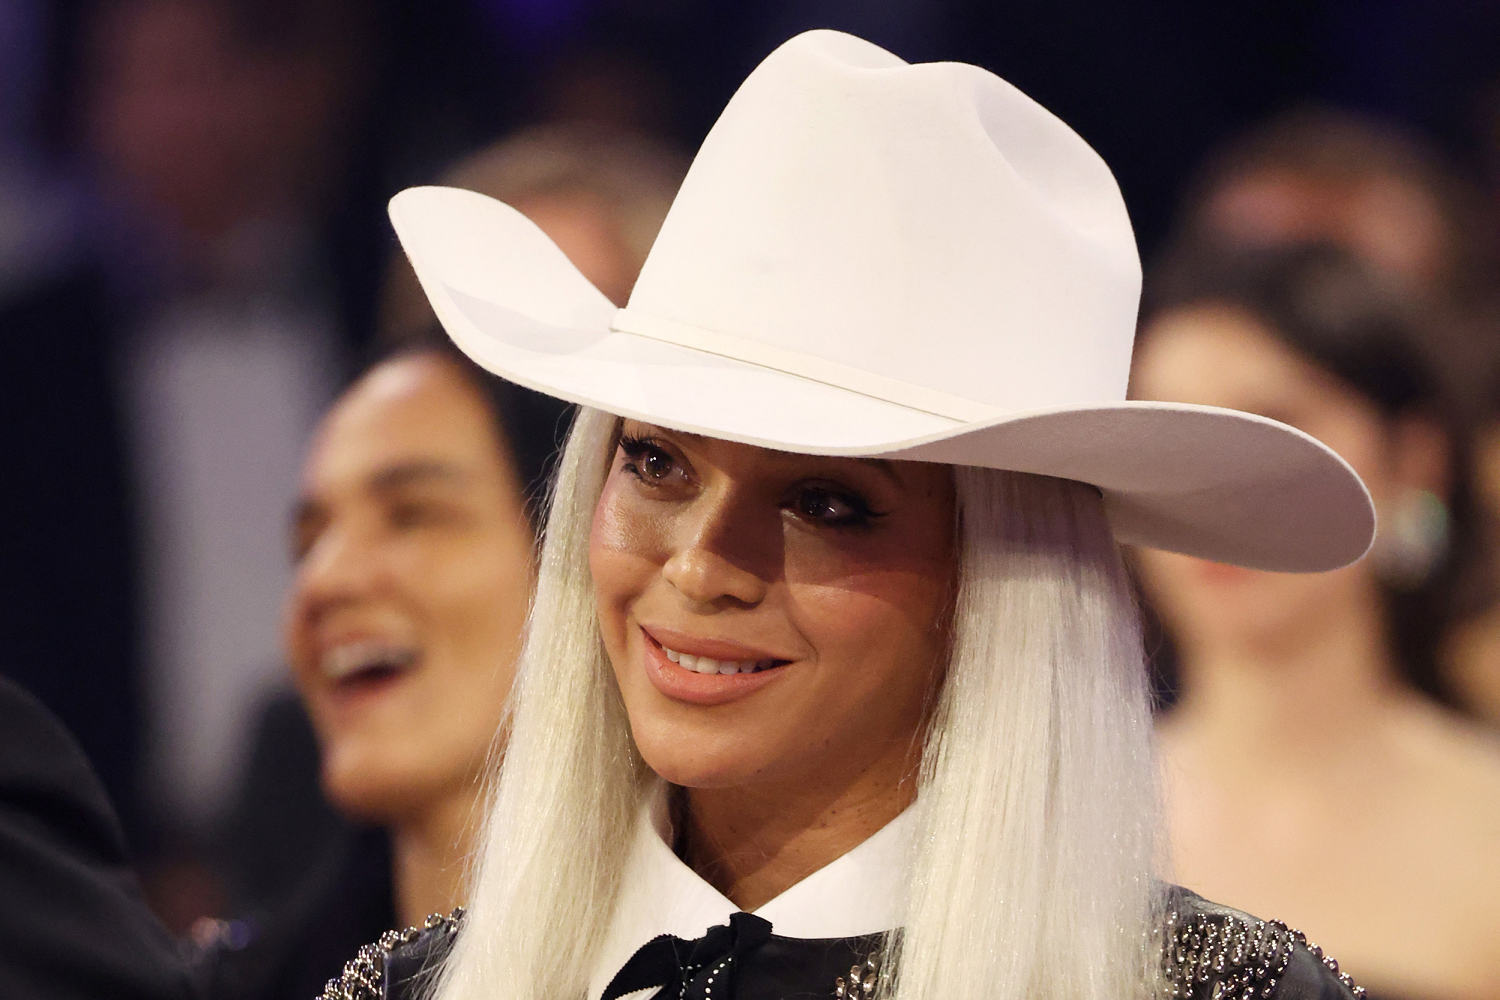 I saw Beyoncé get booed at the CMAs.  I’ve been waiting for 'Cowboy Carter.'